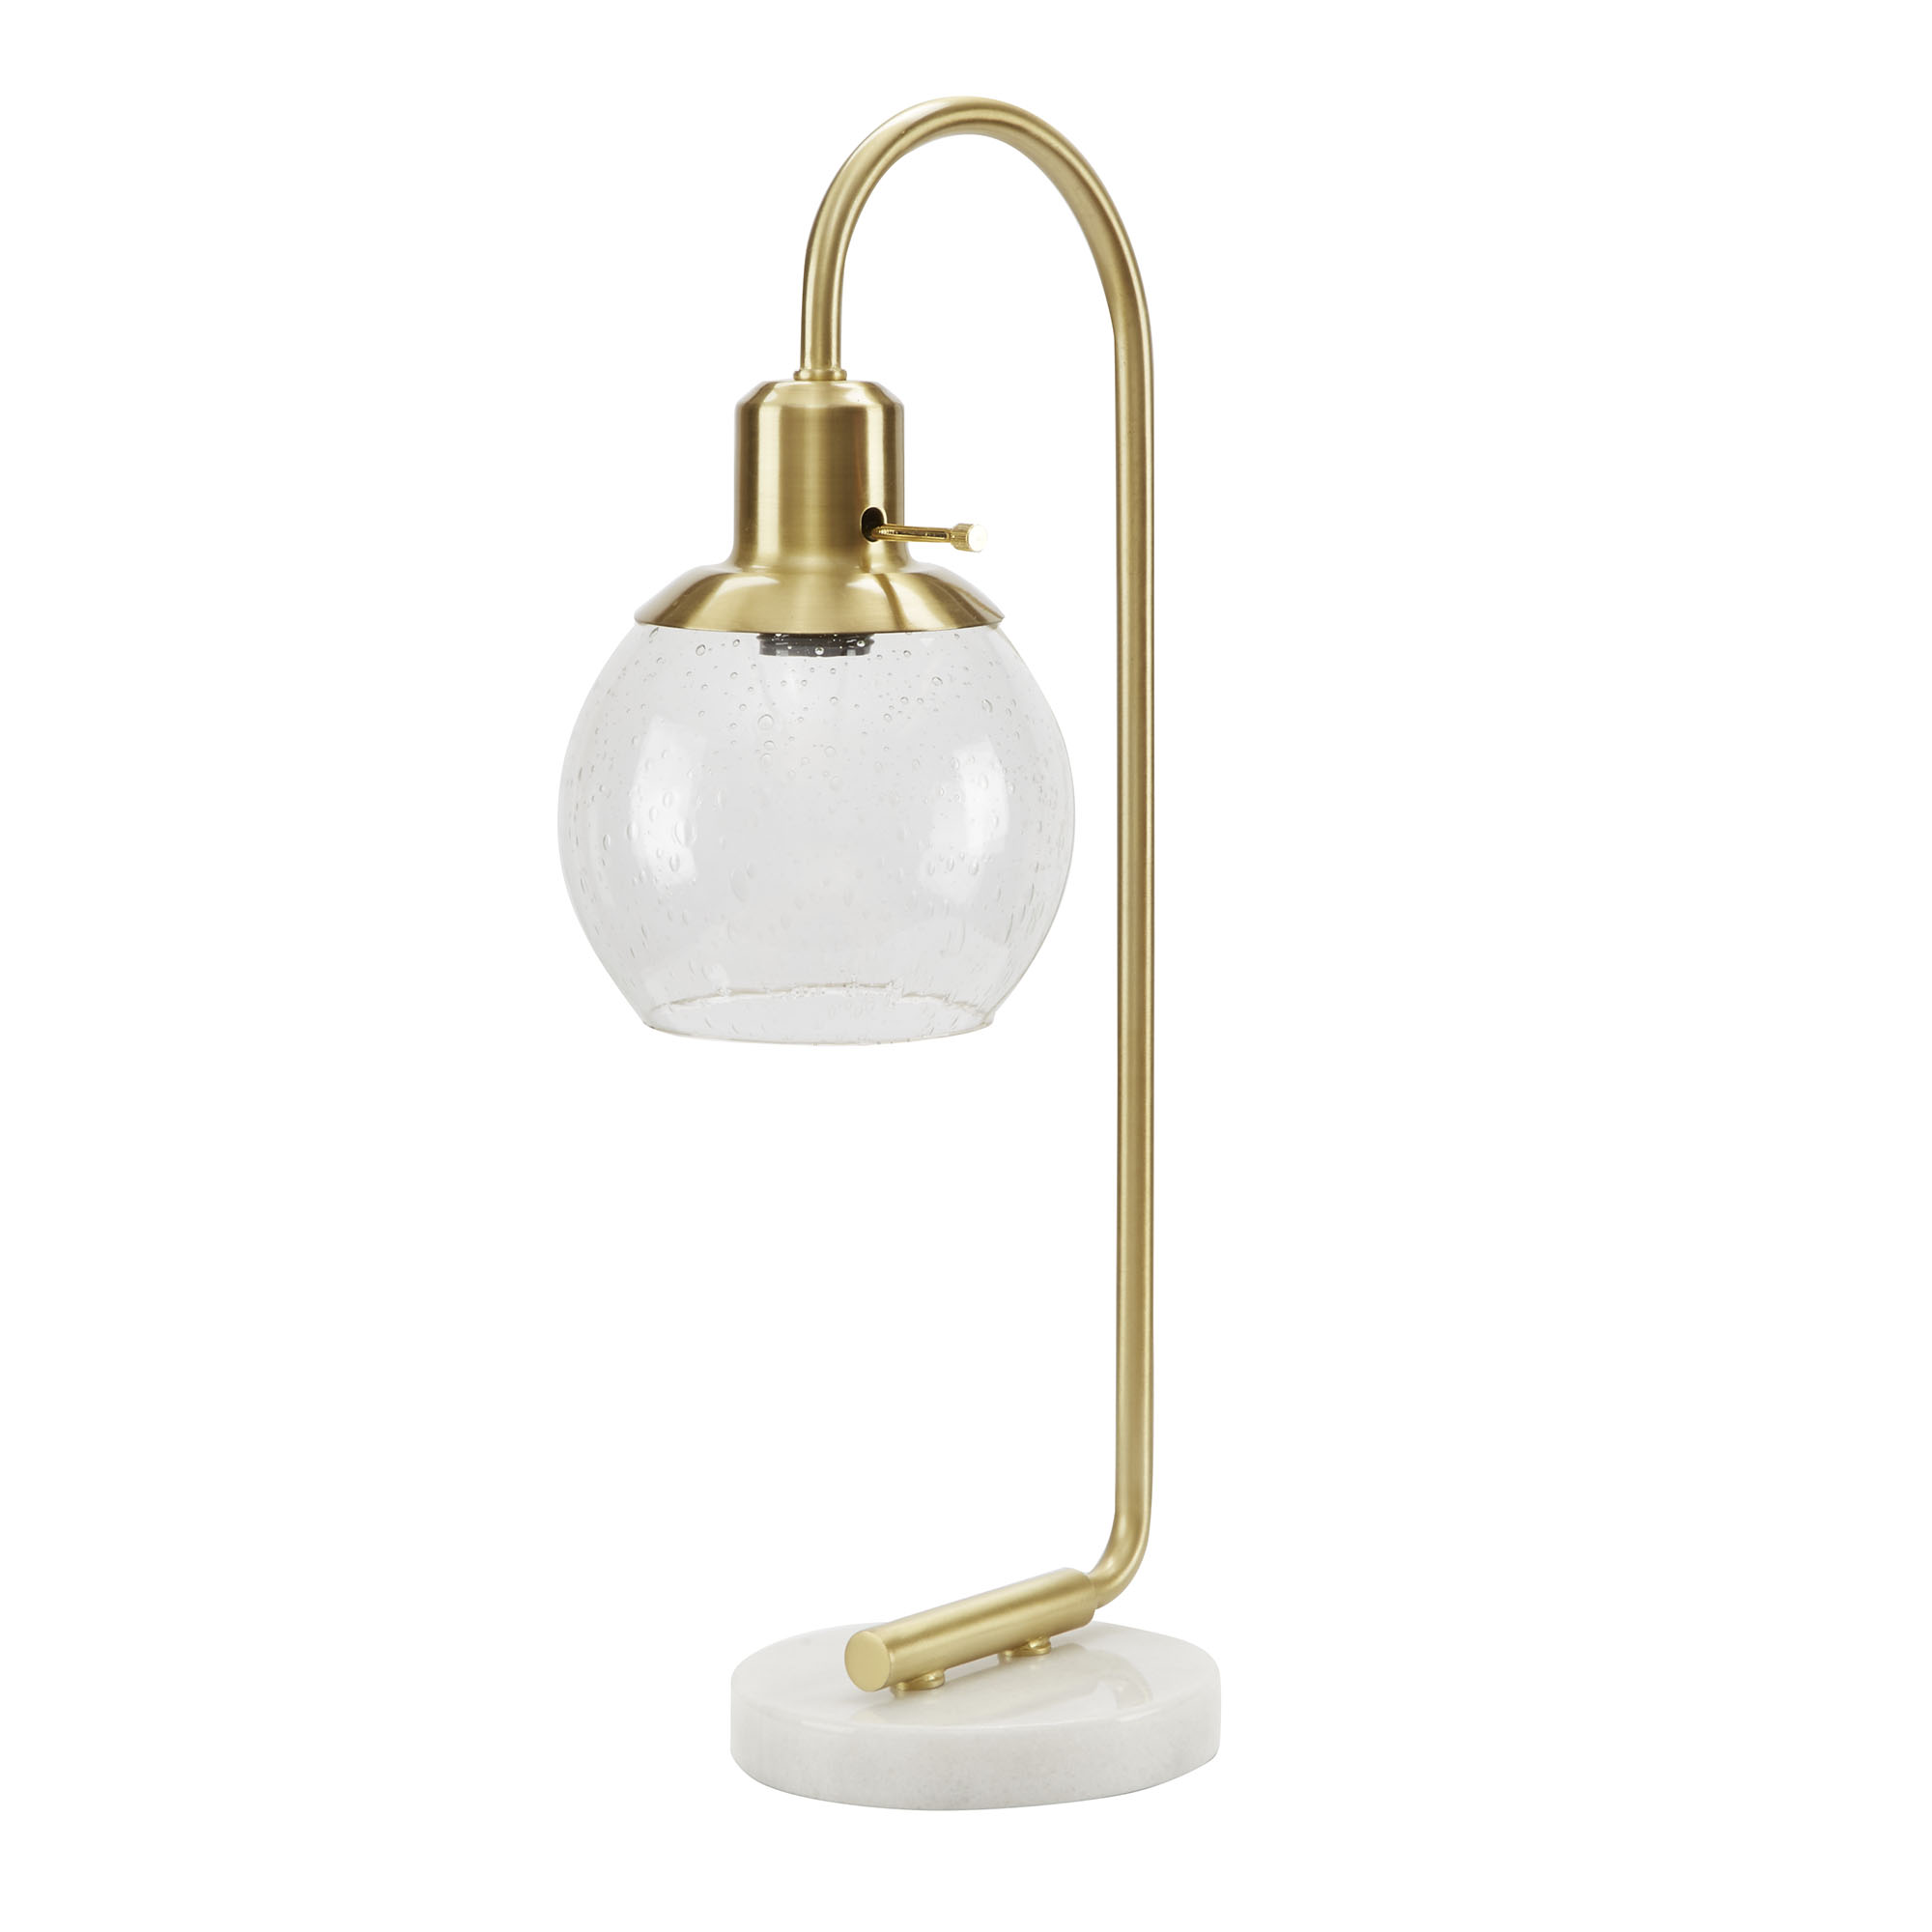 Better Homes & Gardens Real Marble Table Lamp, Brushed Brass Finish - image 4 of 5